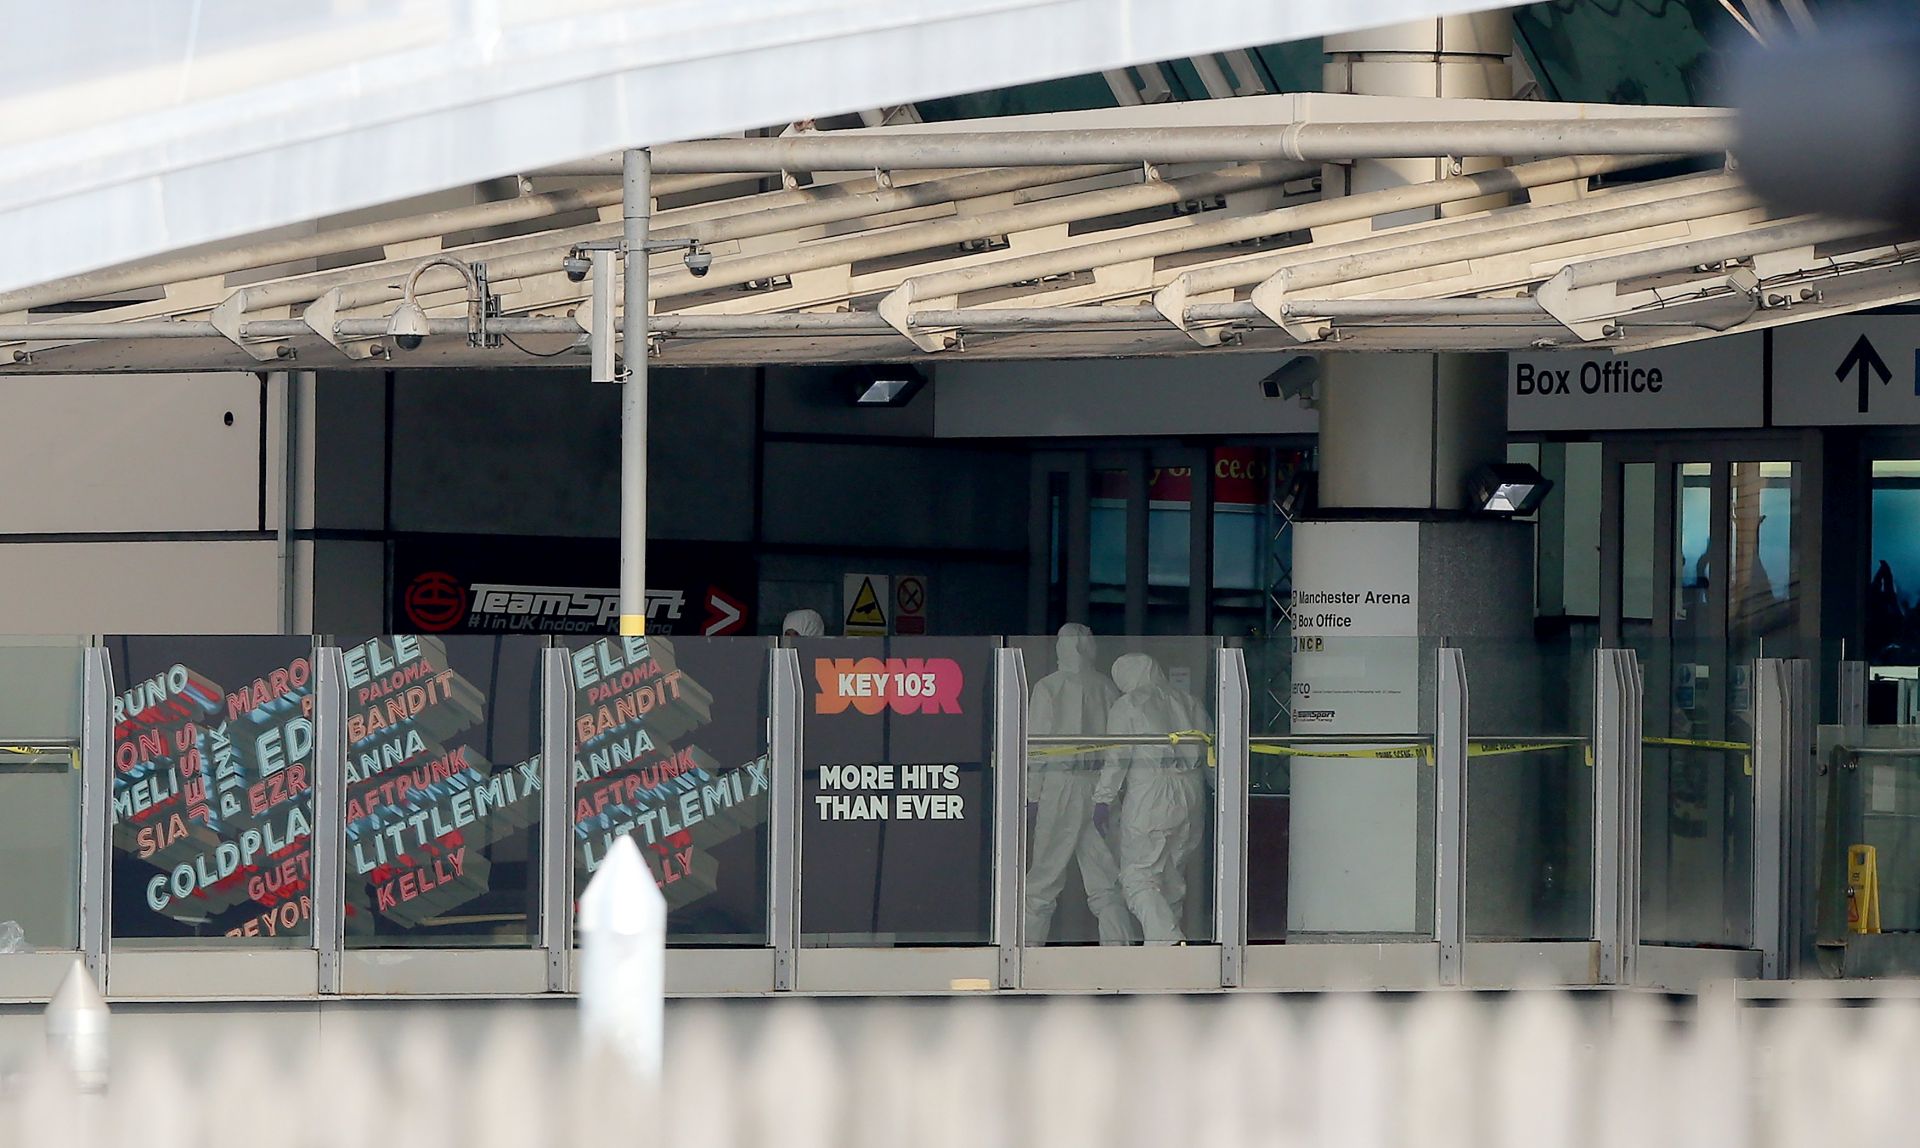 epa05982780 Forensic officers enter the Manchester Arena in Manchester, Britain, 23 May 2017. According to a statement by the Greater Manchester Police, at least 22 people have been confirmed dead and around 59 others were injured, in an explosion at the Manchester Arena on the night of 22 May at the end of a concert by US singer Ariana Grande. Police believe that the explosion, which is being treated as a terrorist incident, was carried out by a single man using an improvised explosive device (IED), who was confirmed dead at the scene.  EPA/NIGEL RODDIS